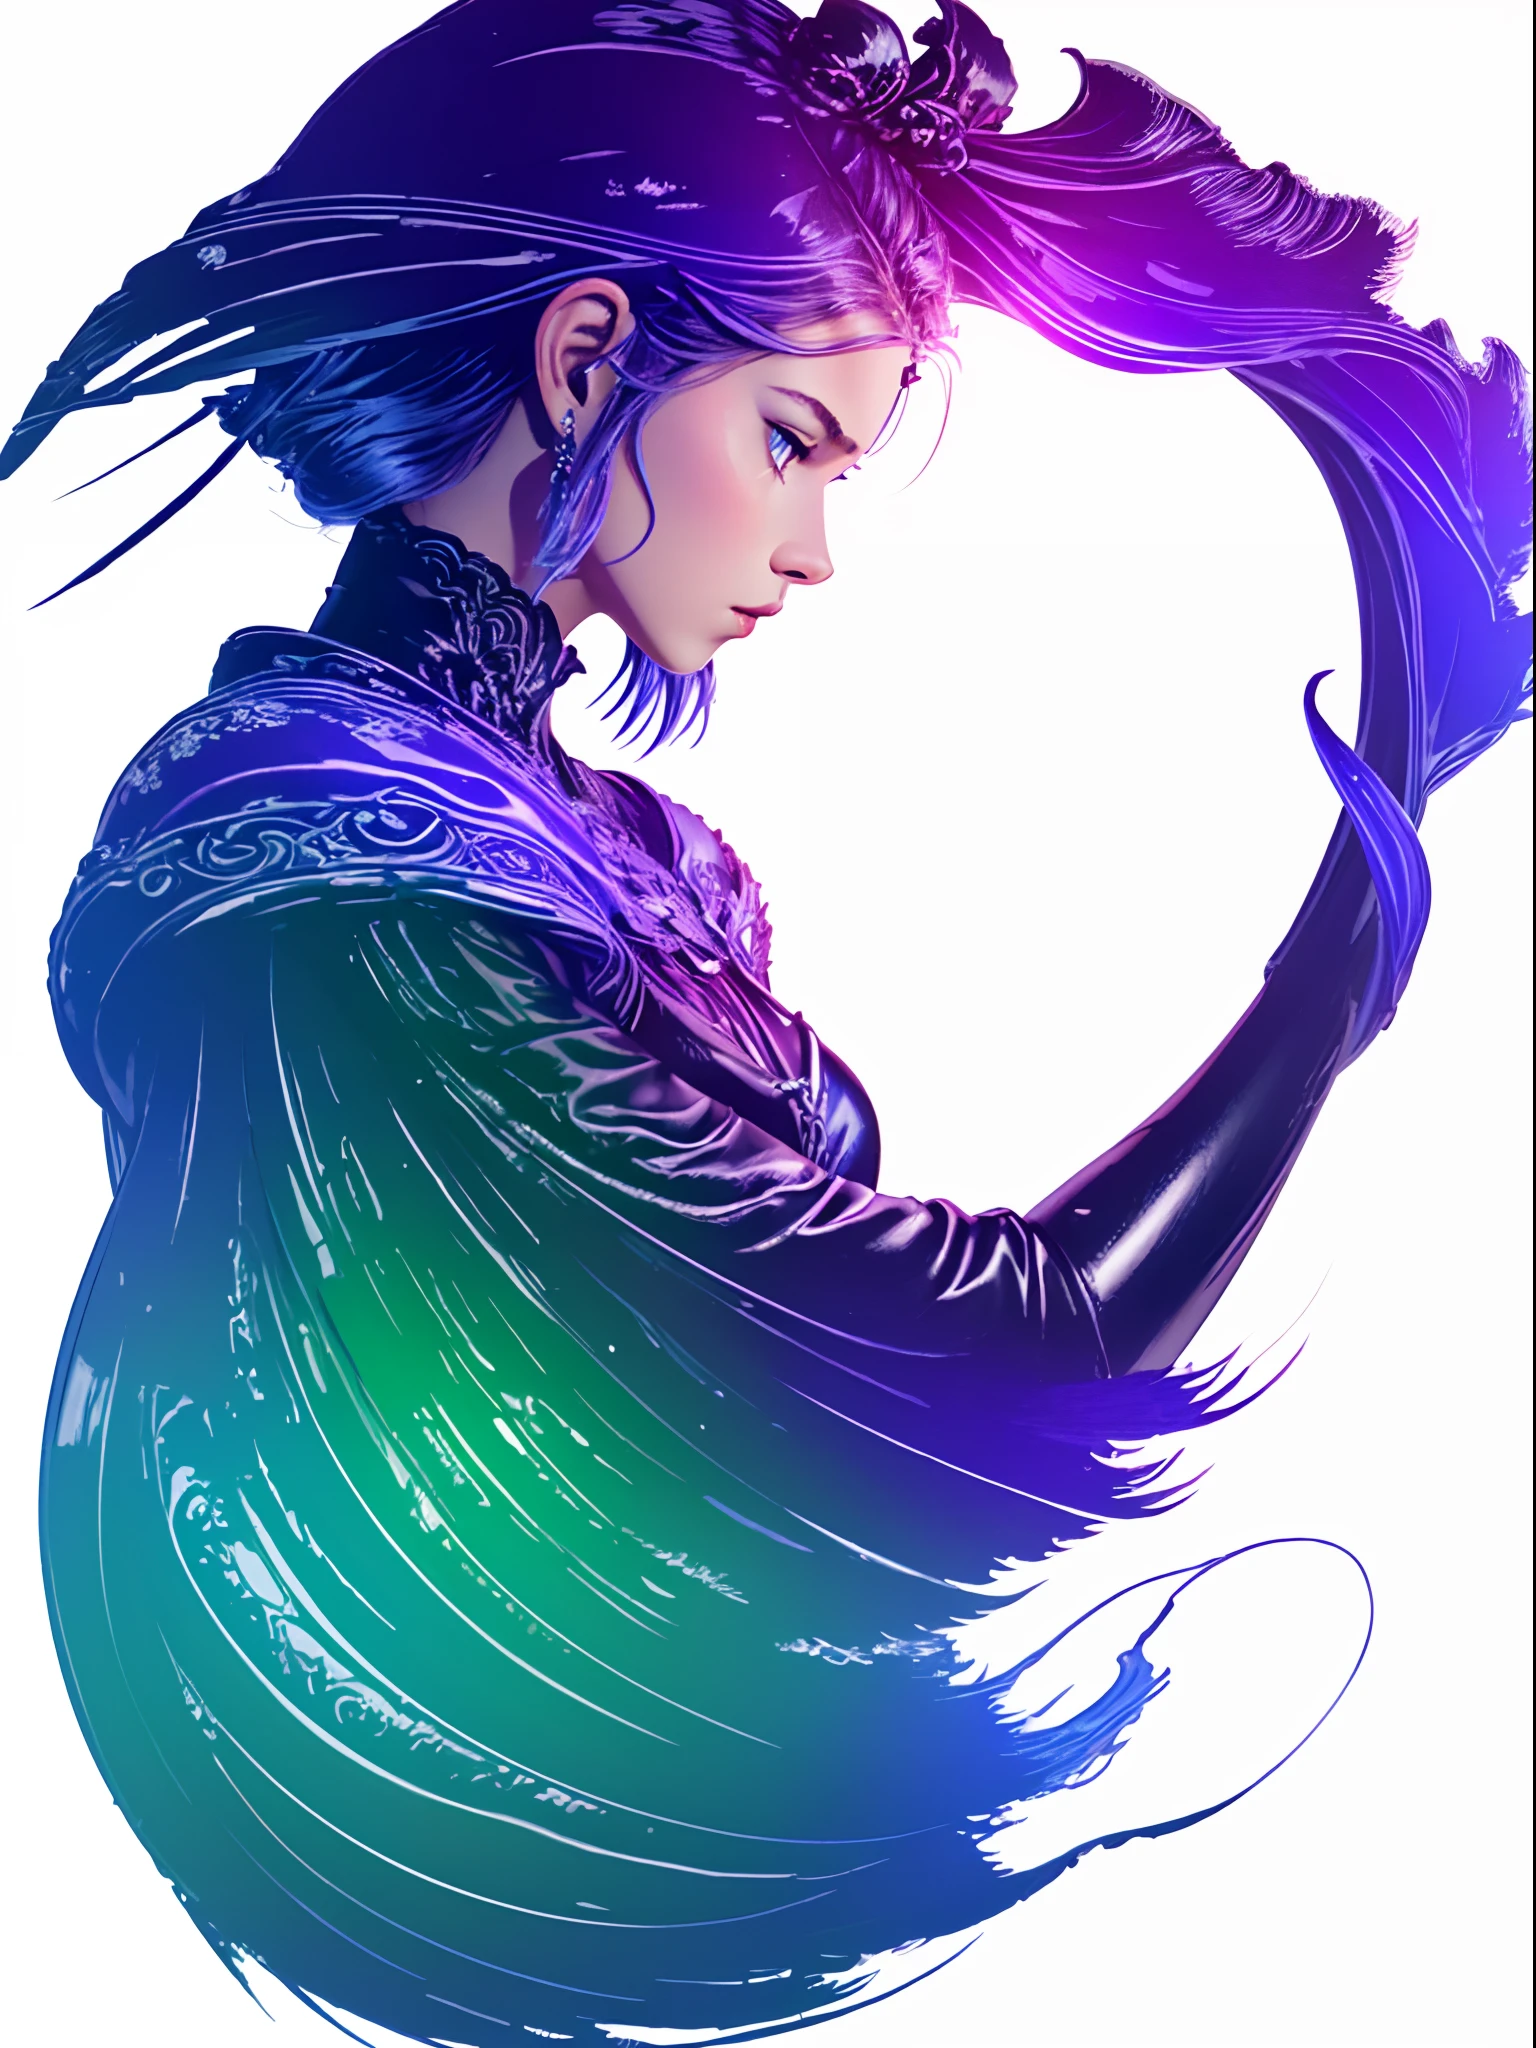 fflogo, white background, simple coloring, blue and purple gradient, masterpiece, best quality, intricate details, 1girl, solo, stunning paladin female, dainty, elegant, prim, proper, swirling magic, green eyes, side profile, full body,